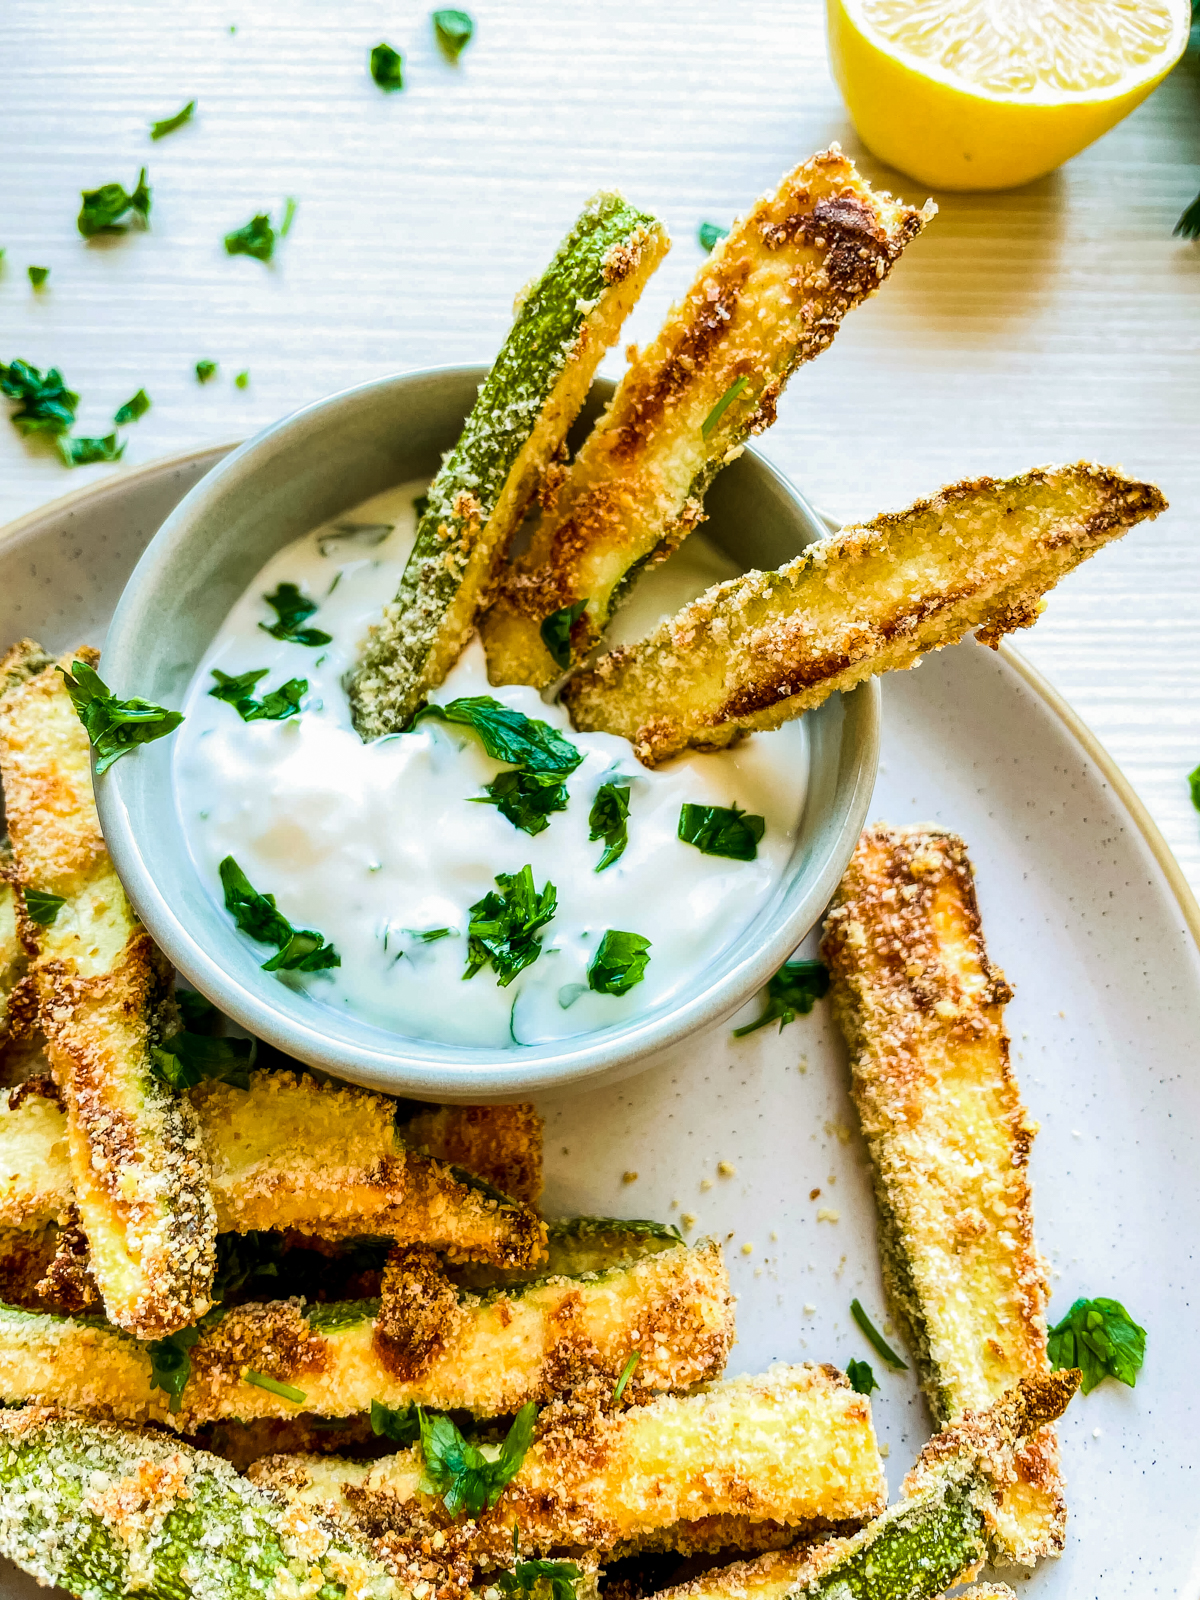 zucchini fries dipped in our favorite dipping sauce